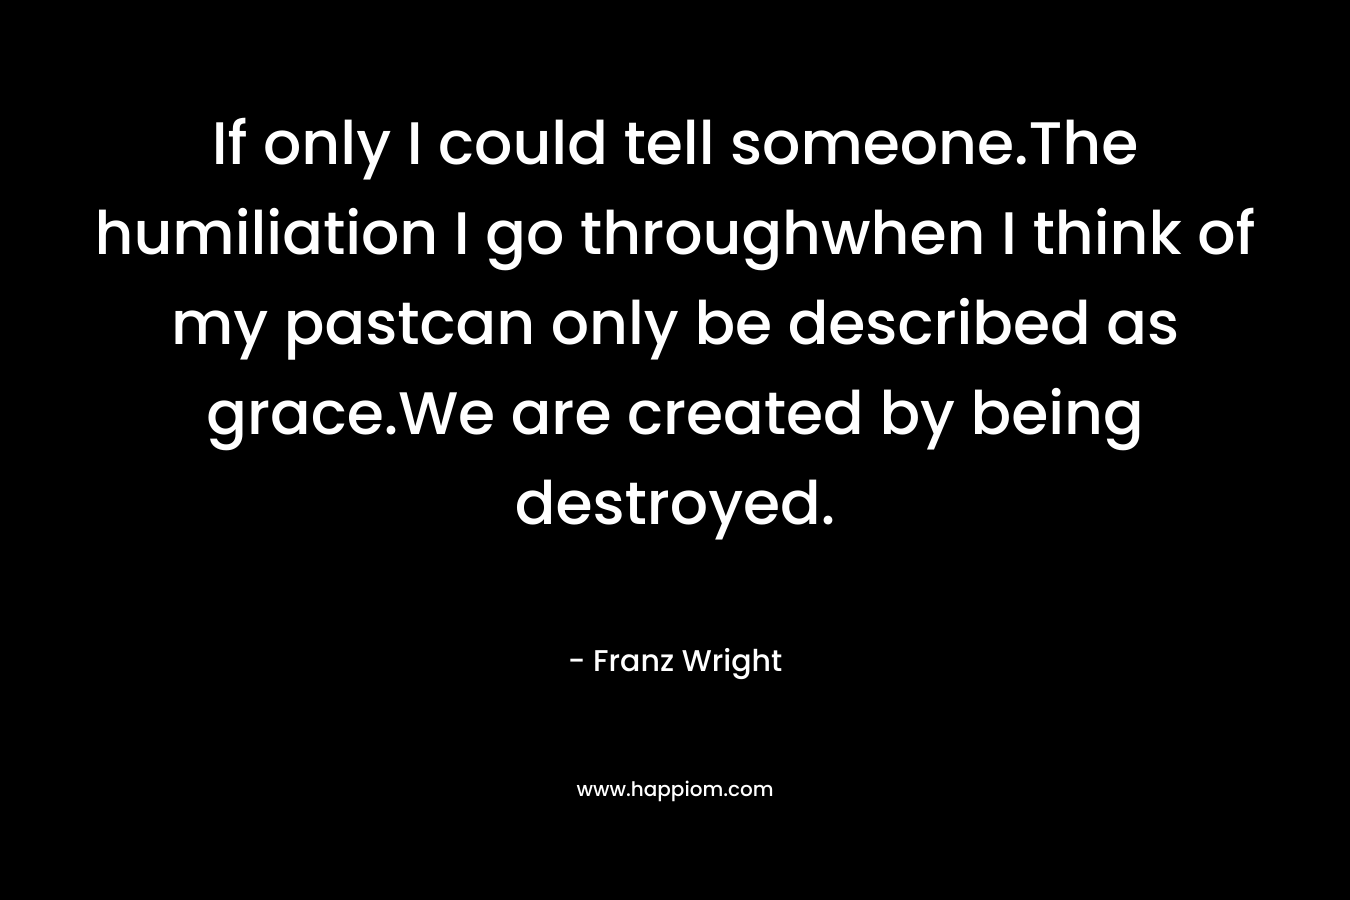 If only I could tell someone.The humiliation I go throughwhen I think of my pastcan only be described as grace.We are created by being destroyed. – Franz Wright